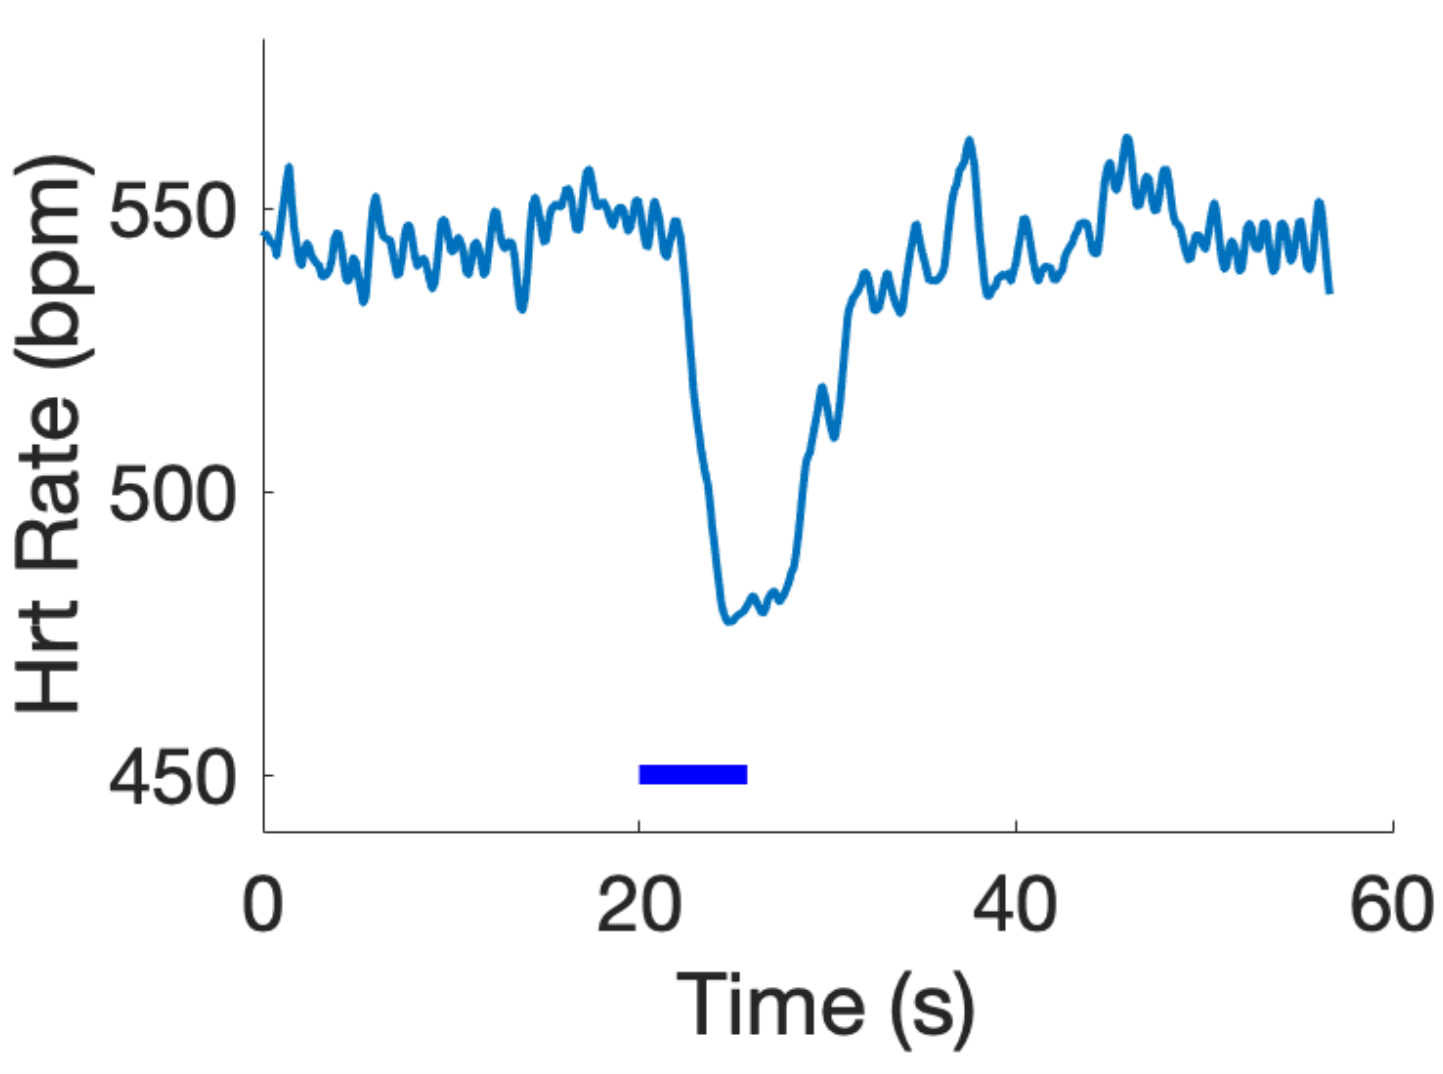 Heart rate graph to validate the placement and use of the spiral nerve cuff